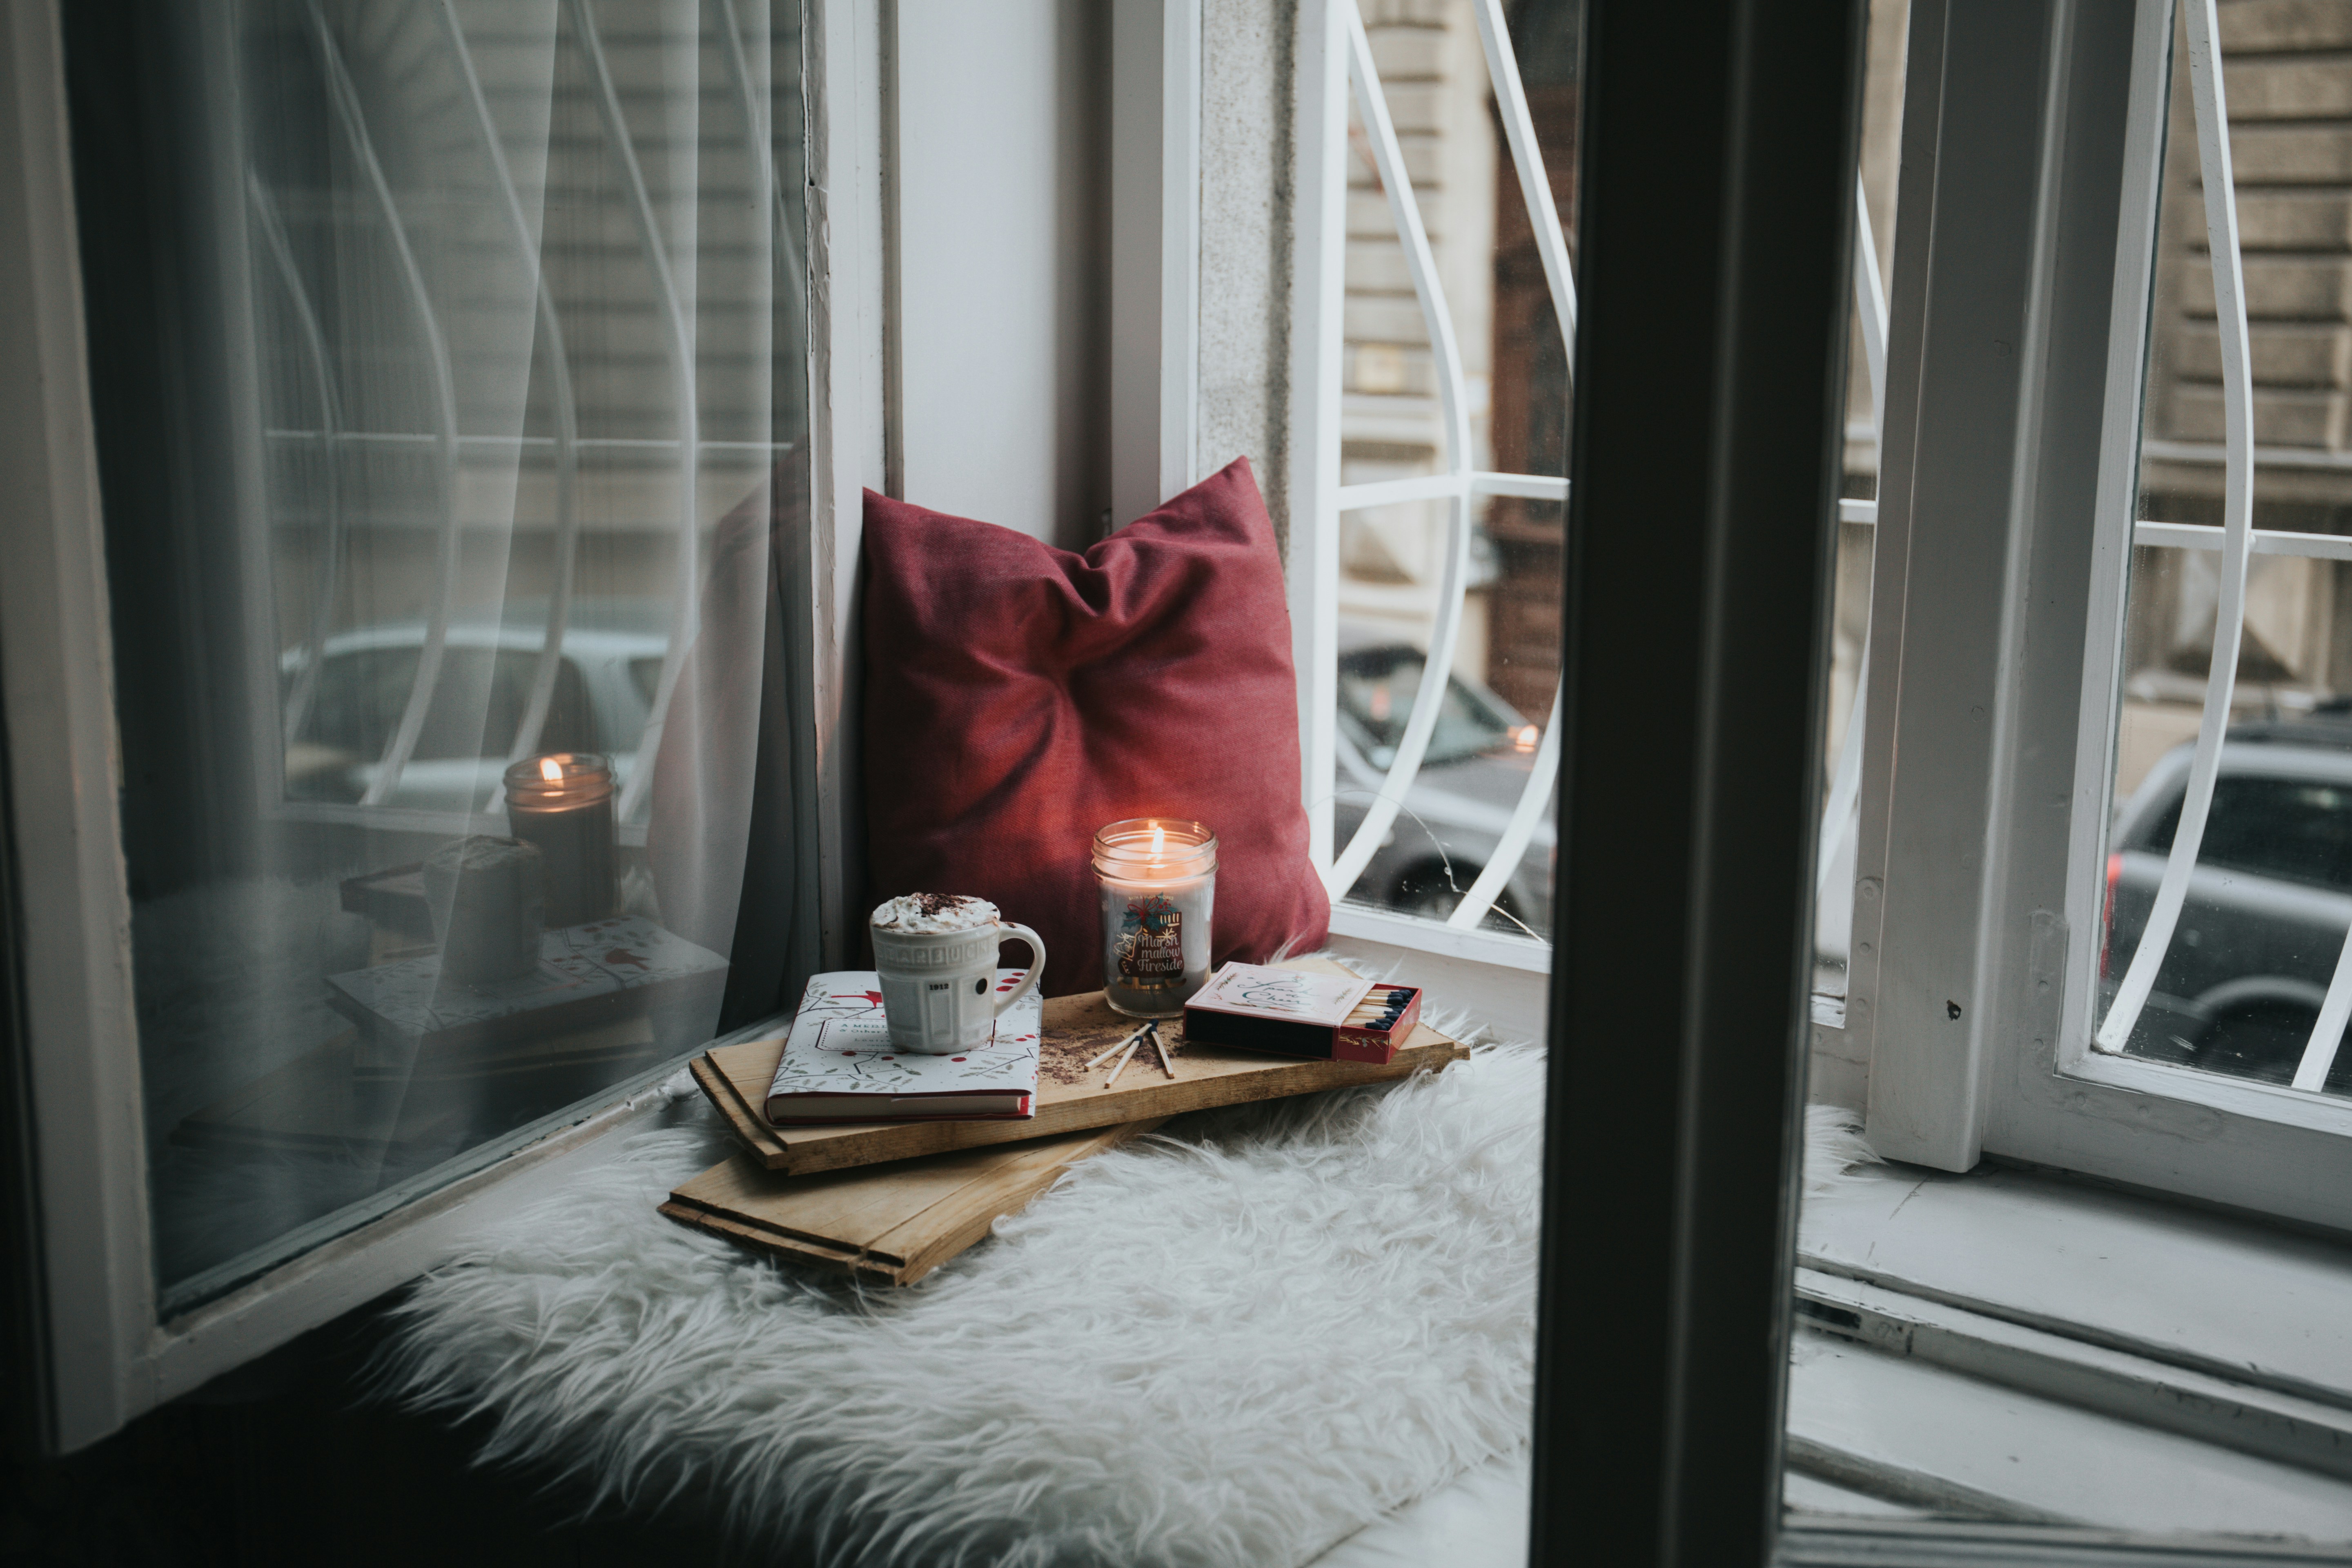 An example of a self-care kit, with a pillow, some books, a candle, and a mug topped with whipped cream set on a windowsill.